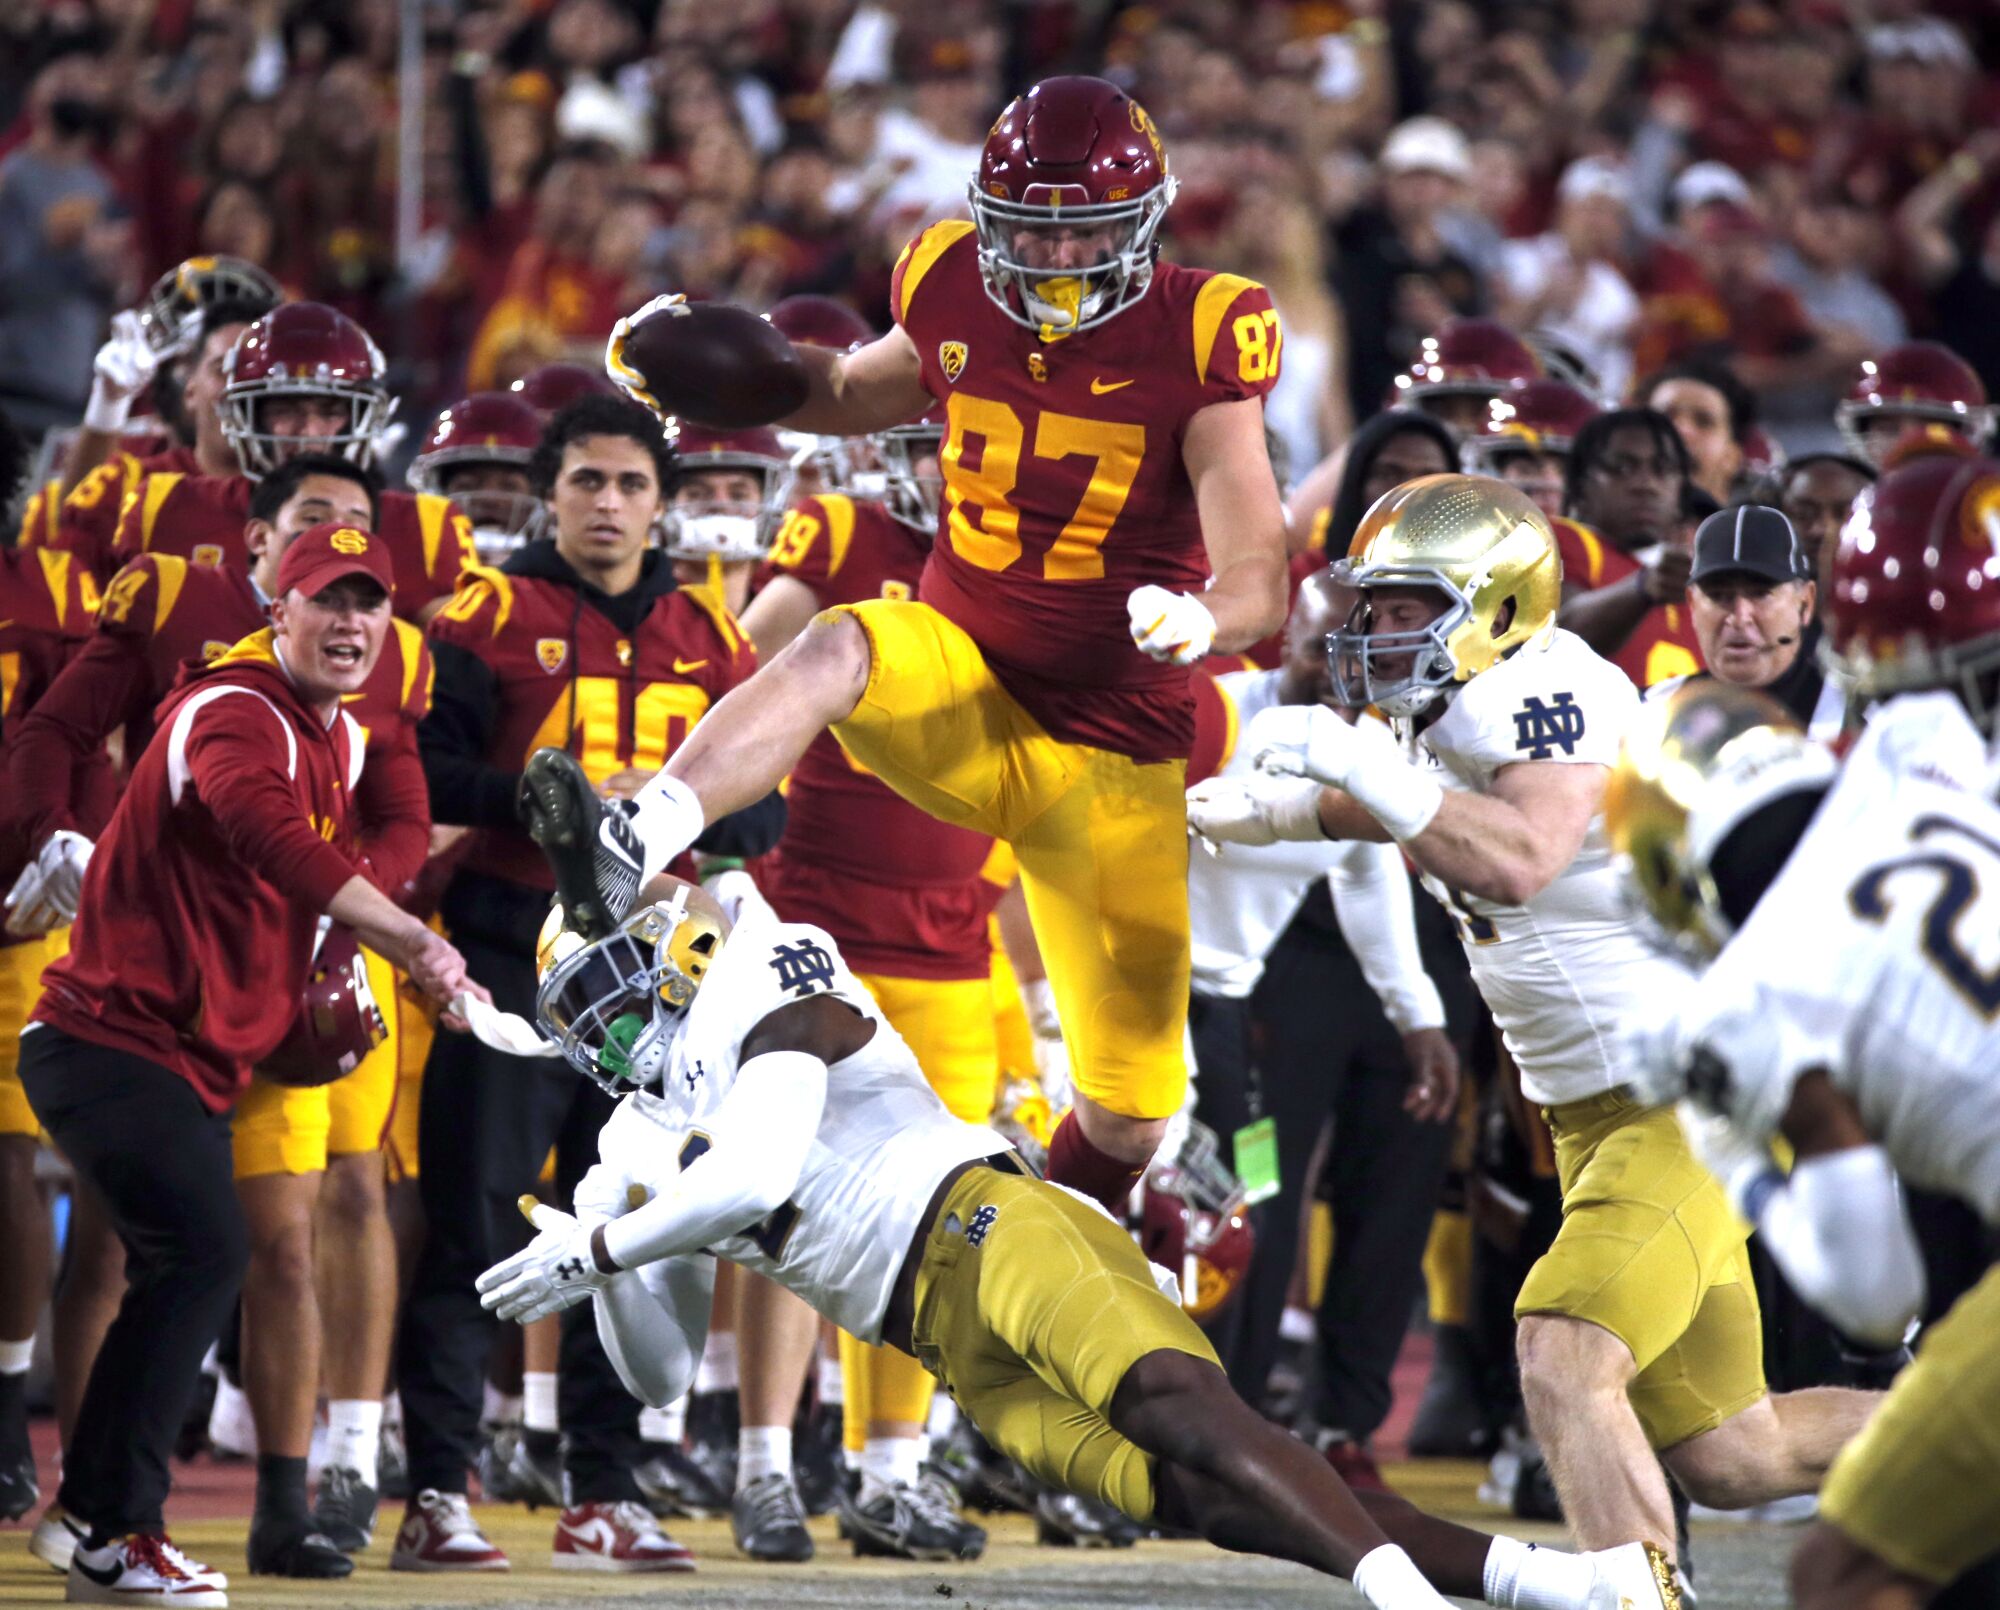 USC tight end Lake McRee hurdles over Notre Dame defensive back DJ Brown in the first quarter.